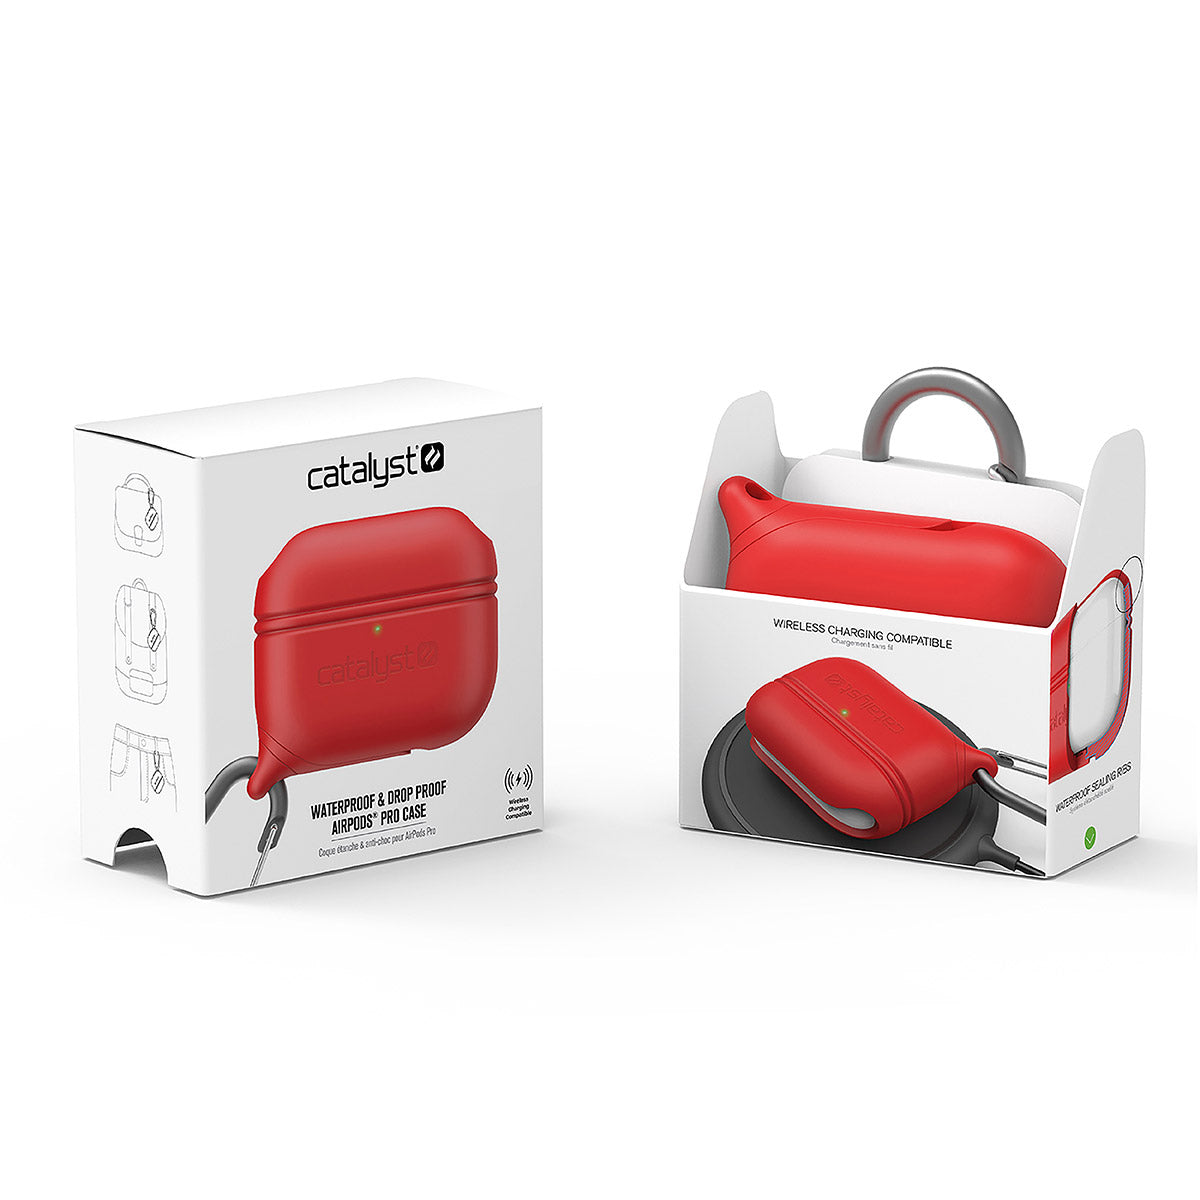 CATAPLAPDPRORED | catalyst airpods pro gen 2 1 waterproof case carabiner special edition red packaging